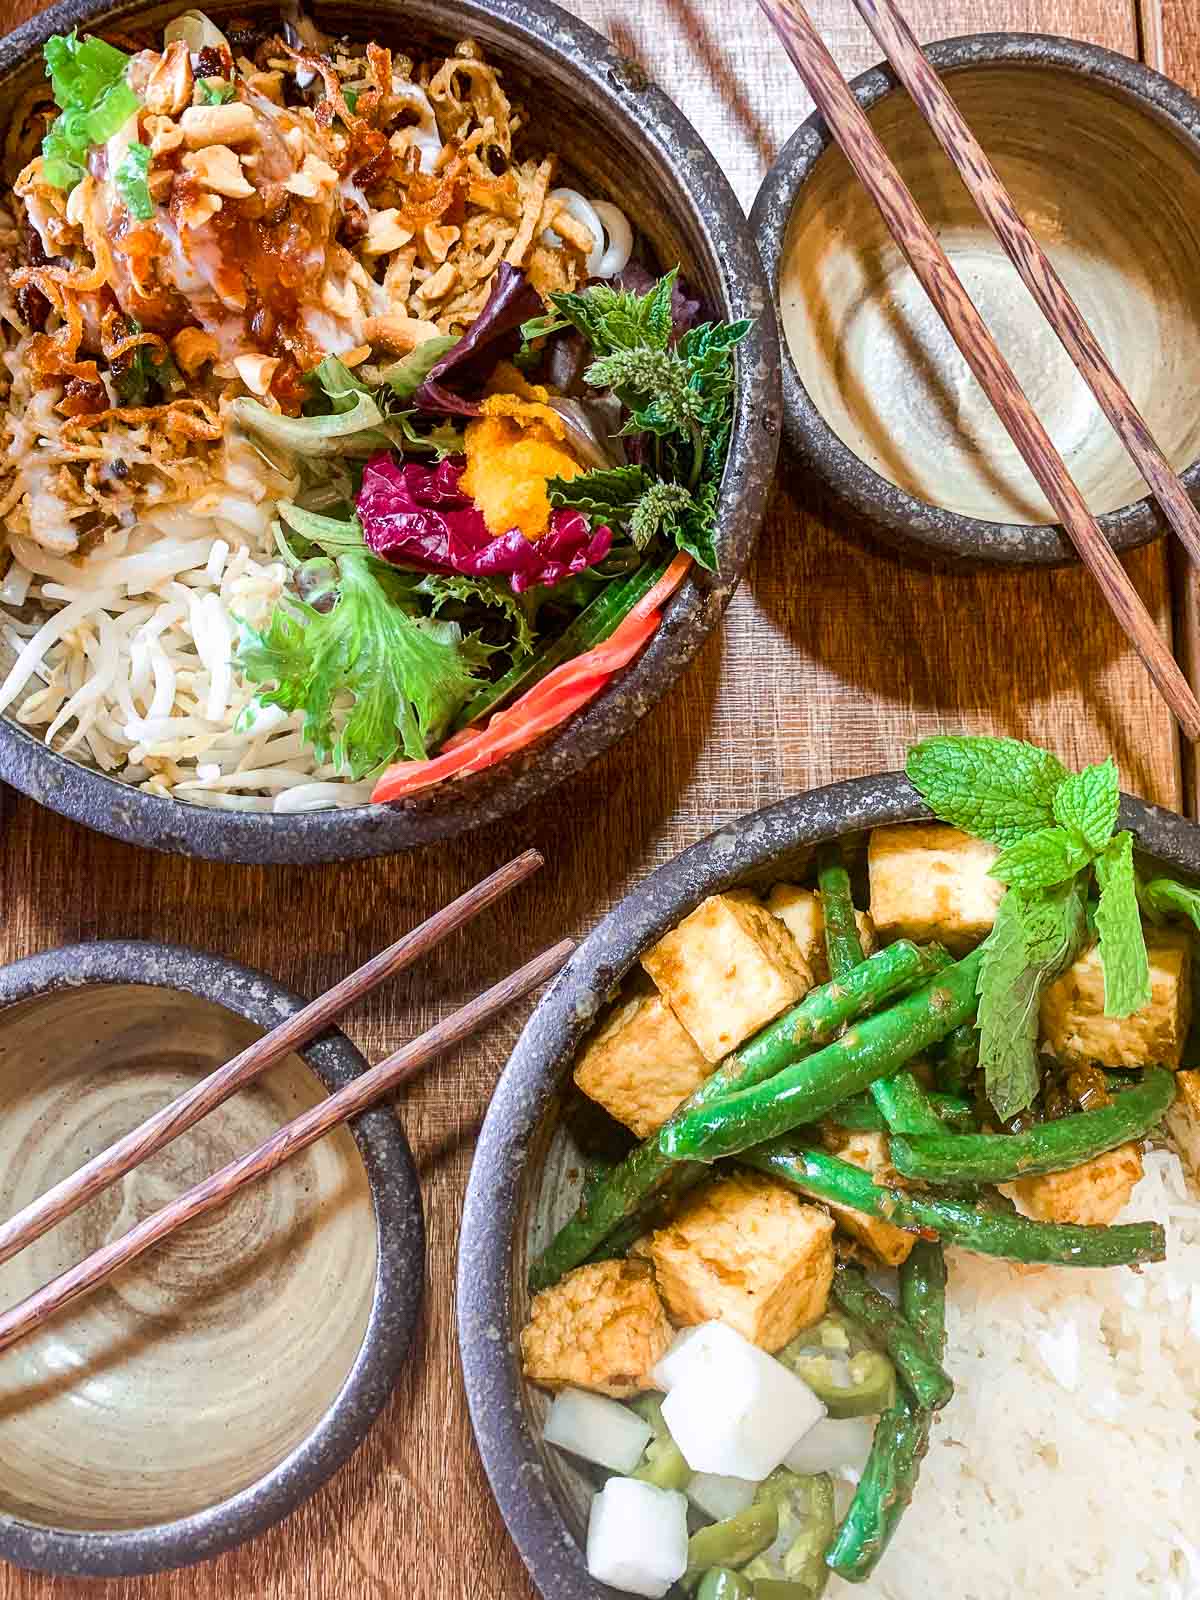 25 Best Vegan Restaurants in Vancouver BC for 2023 - tofu and green beans with peanut noodles by Do Chay